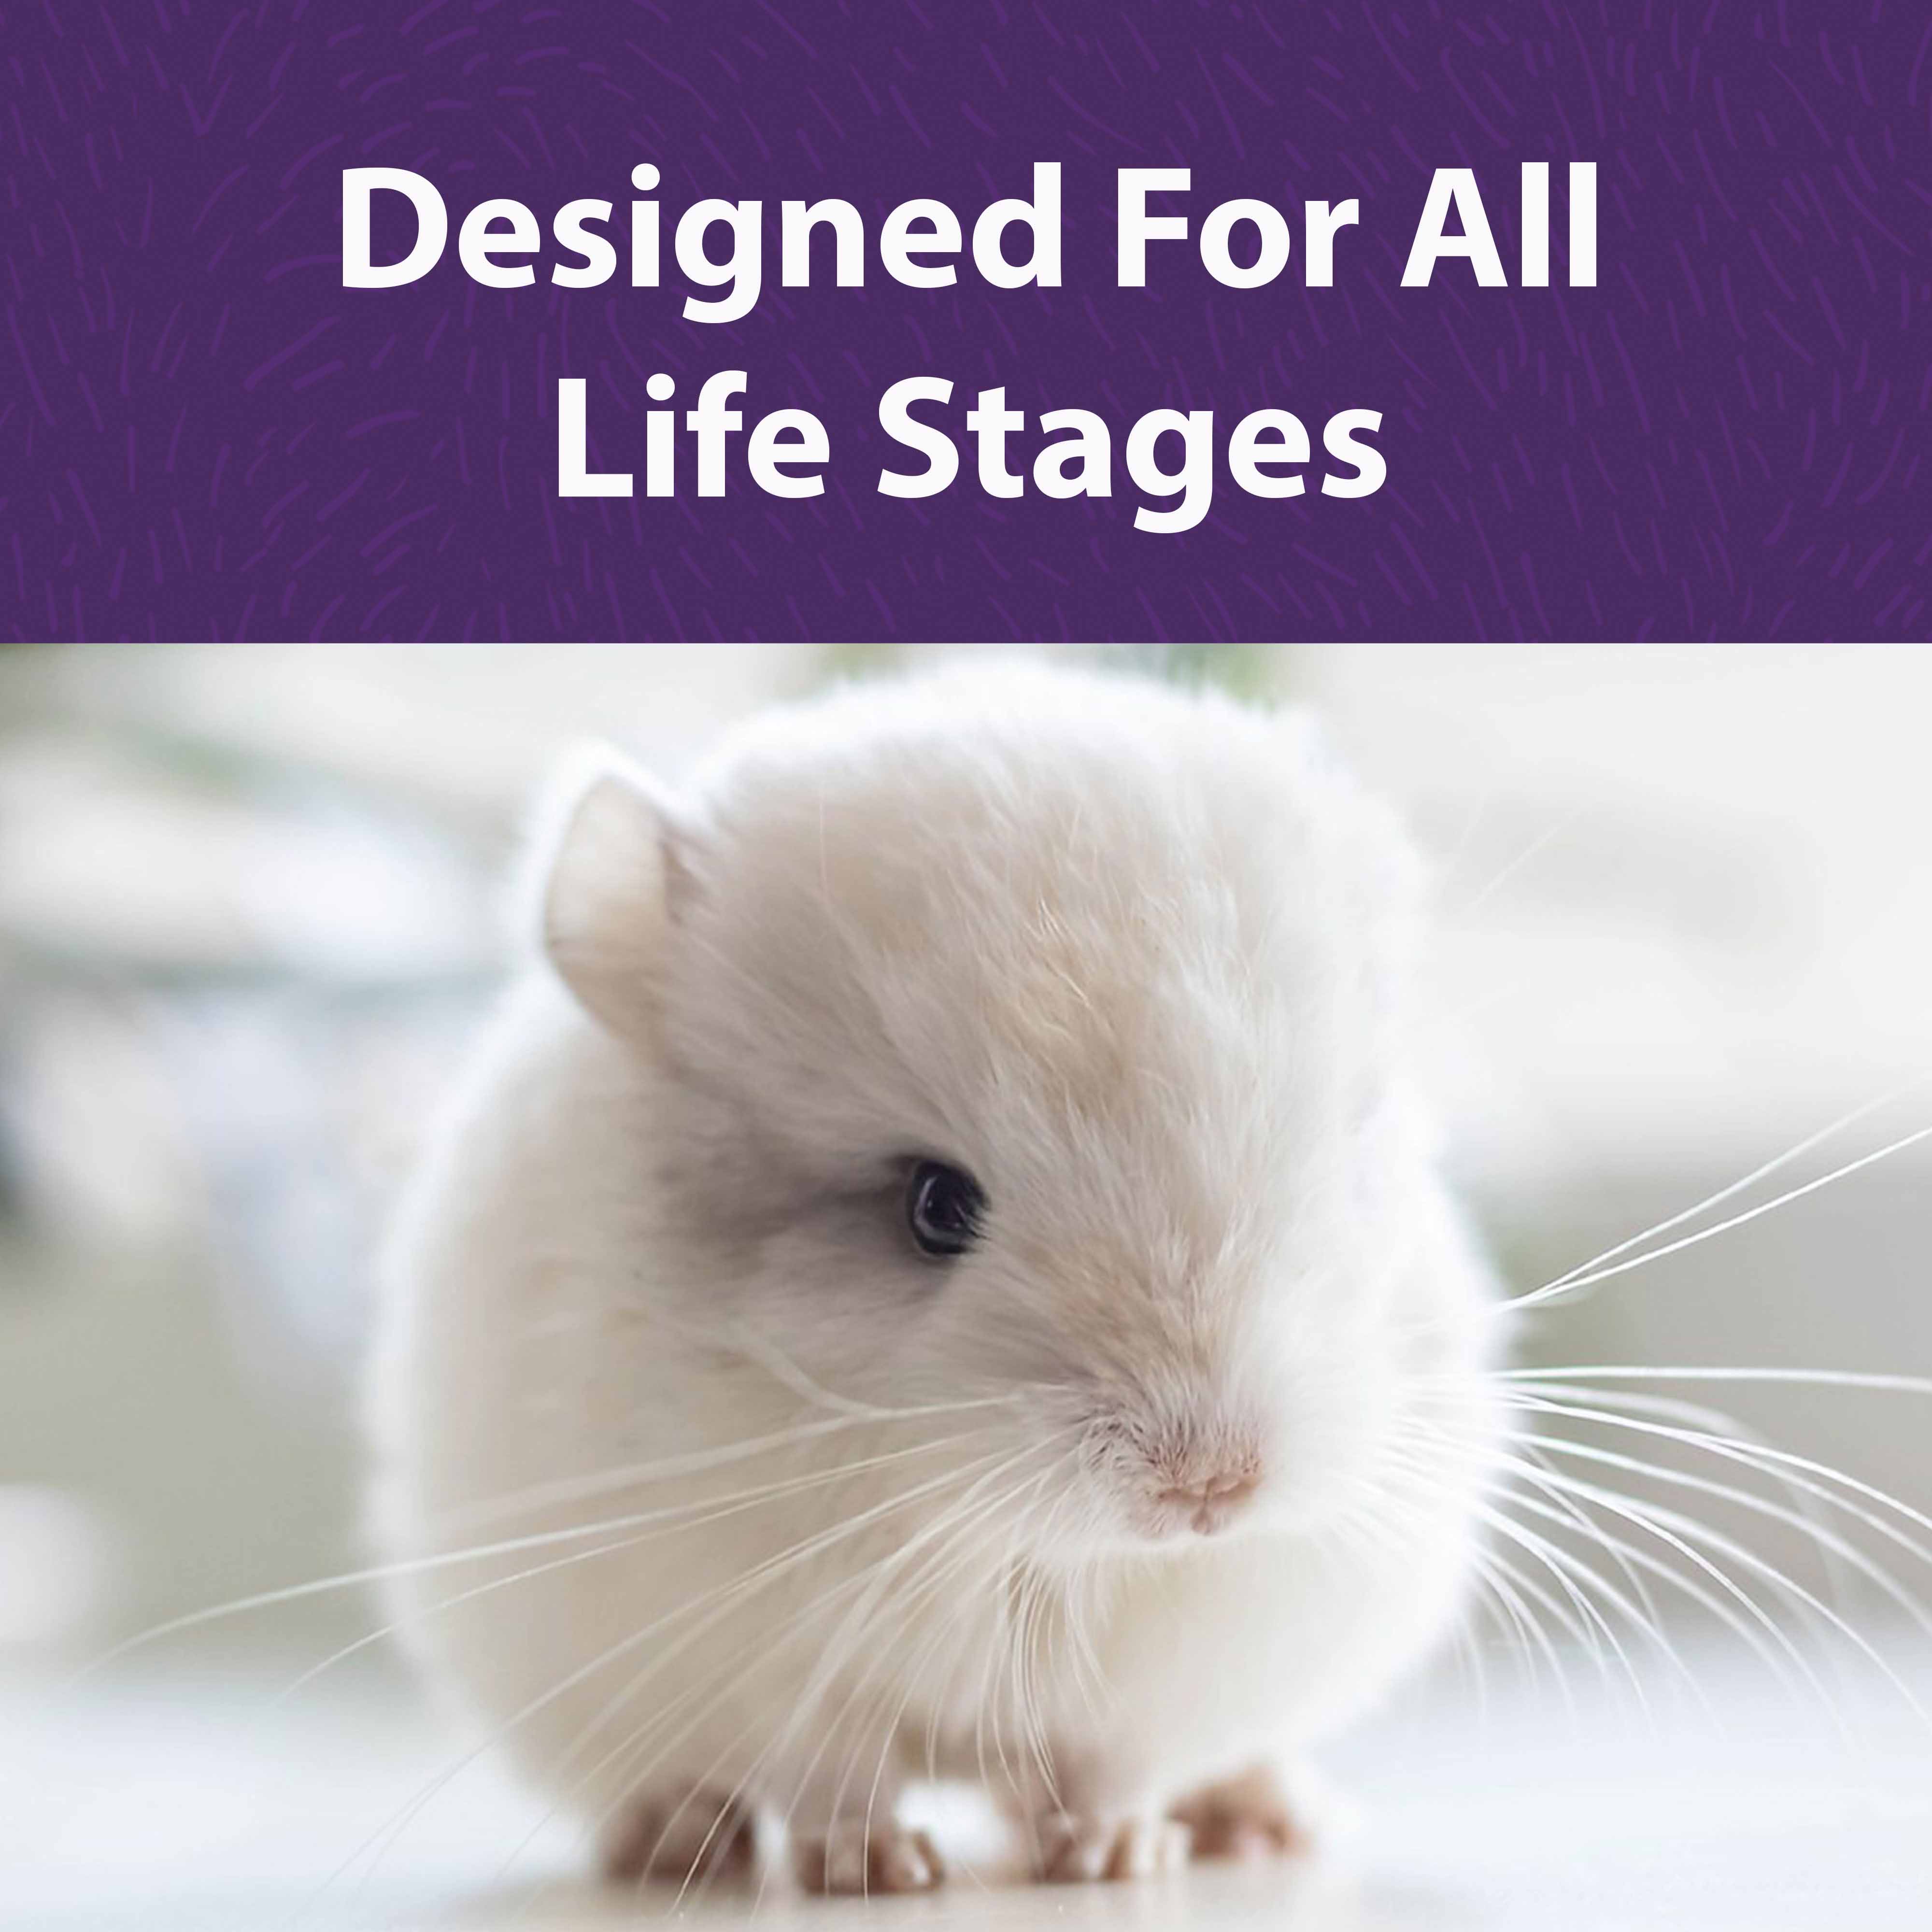 Designed for all life stages